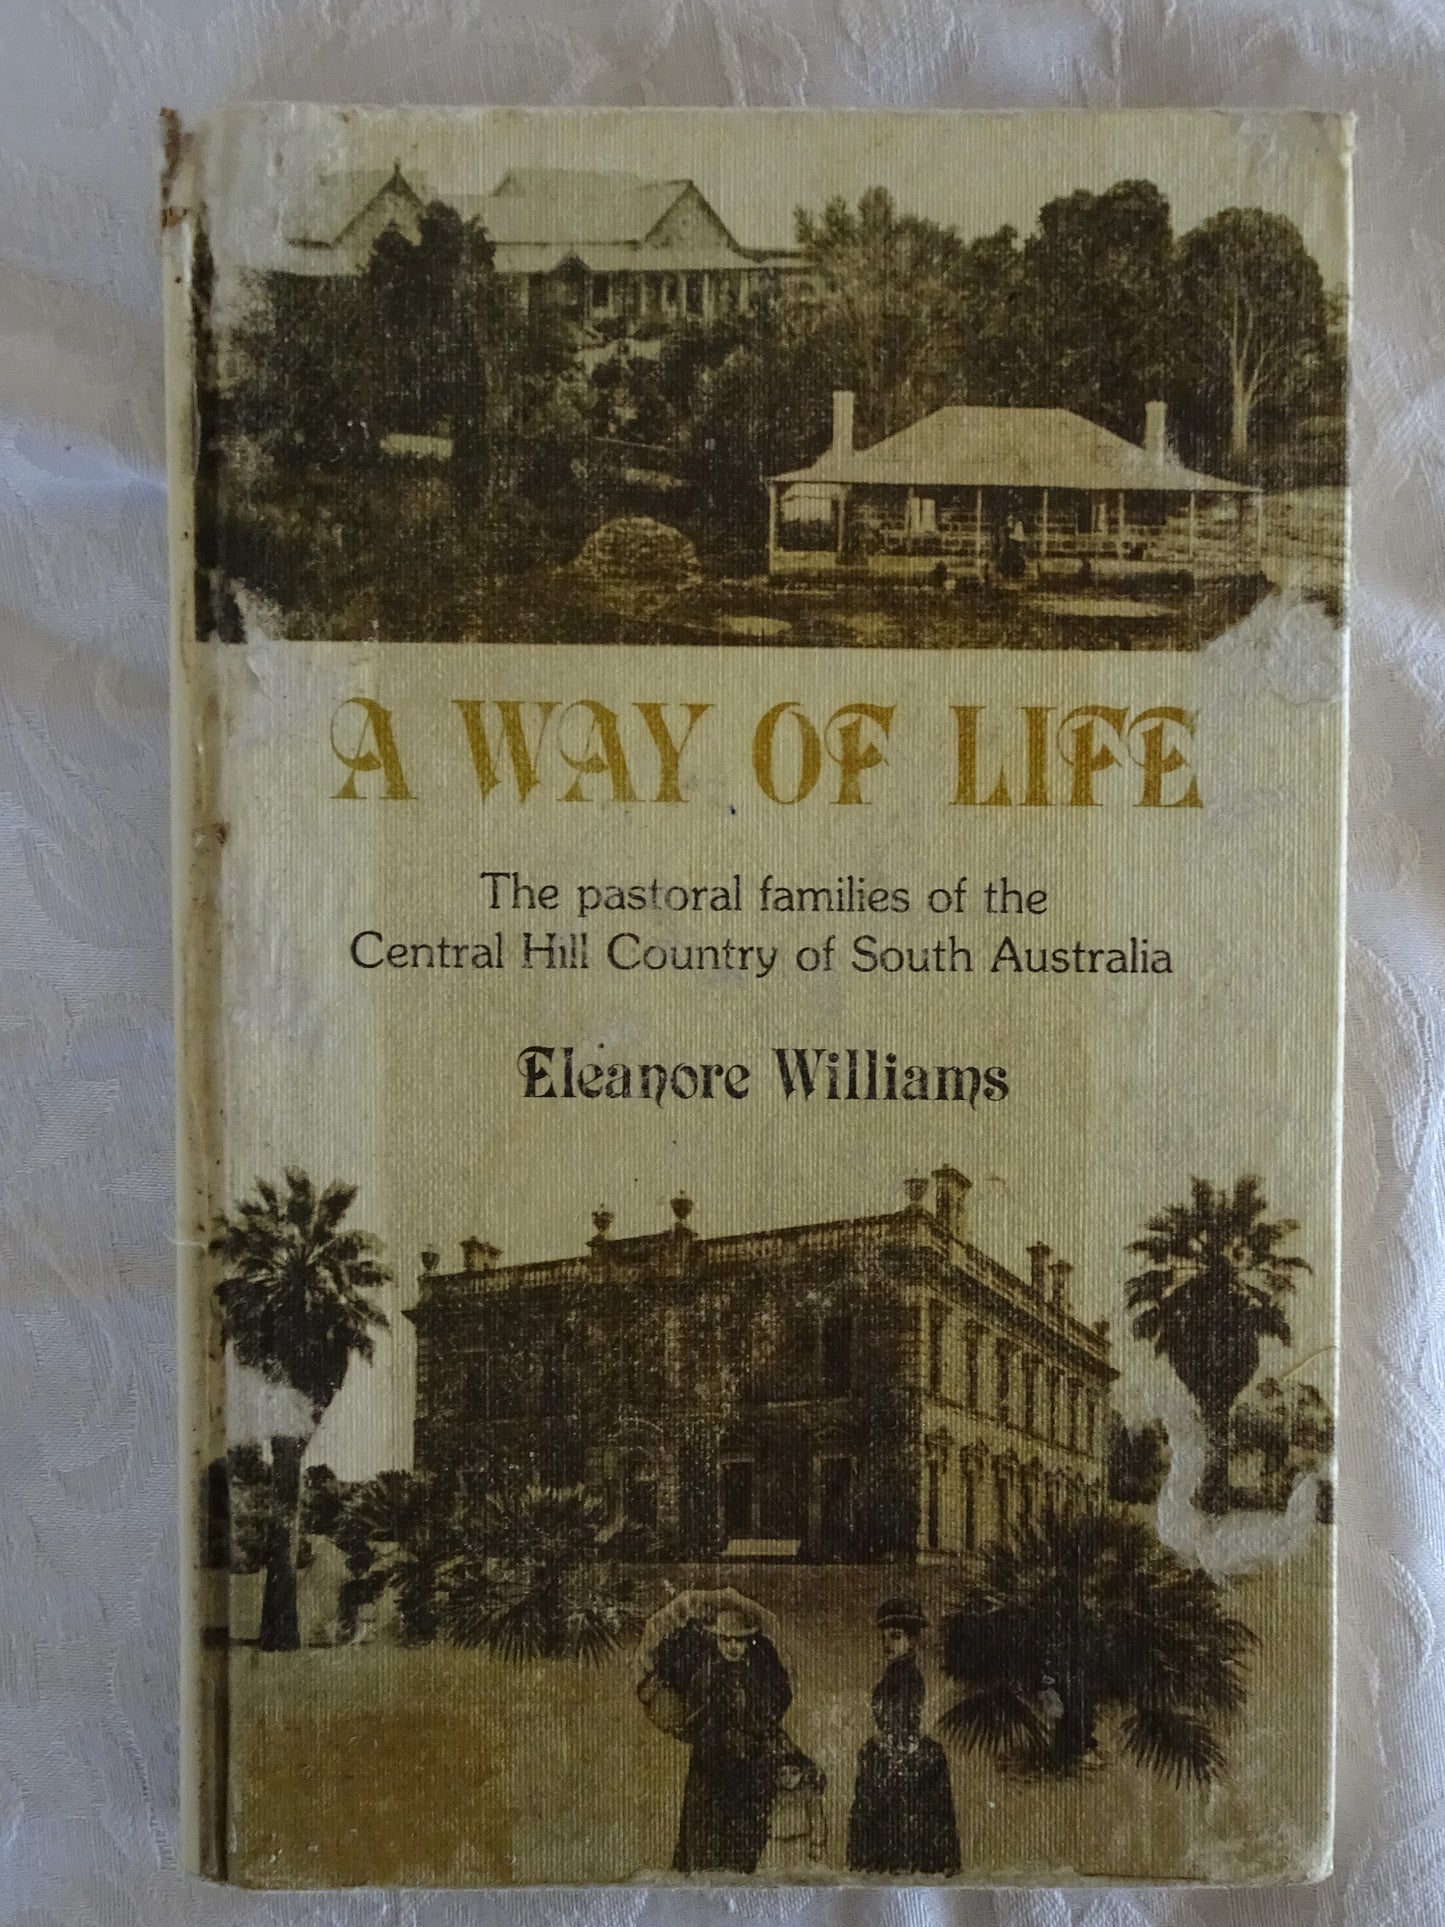 A Way Of Life by Eleanore Williams